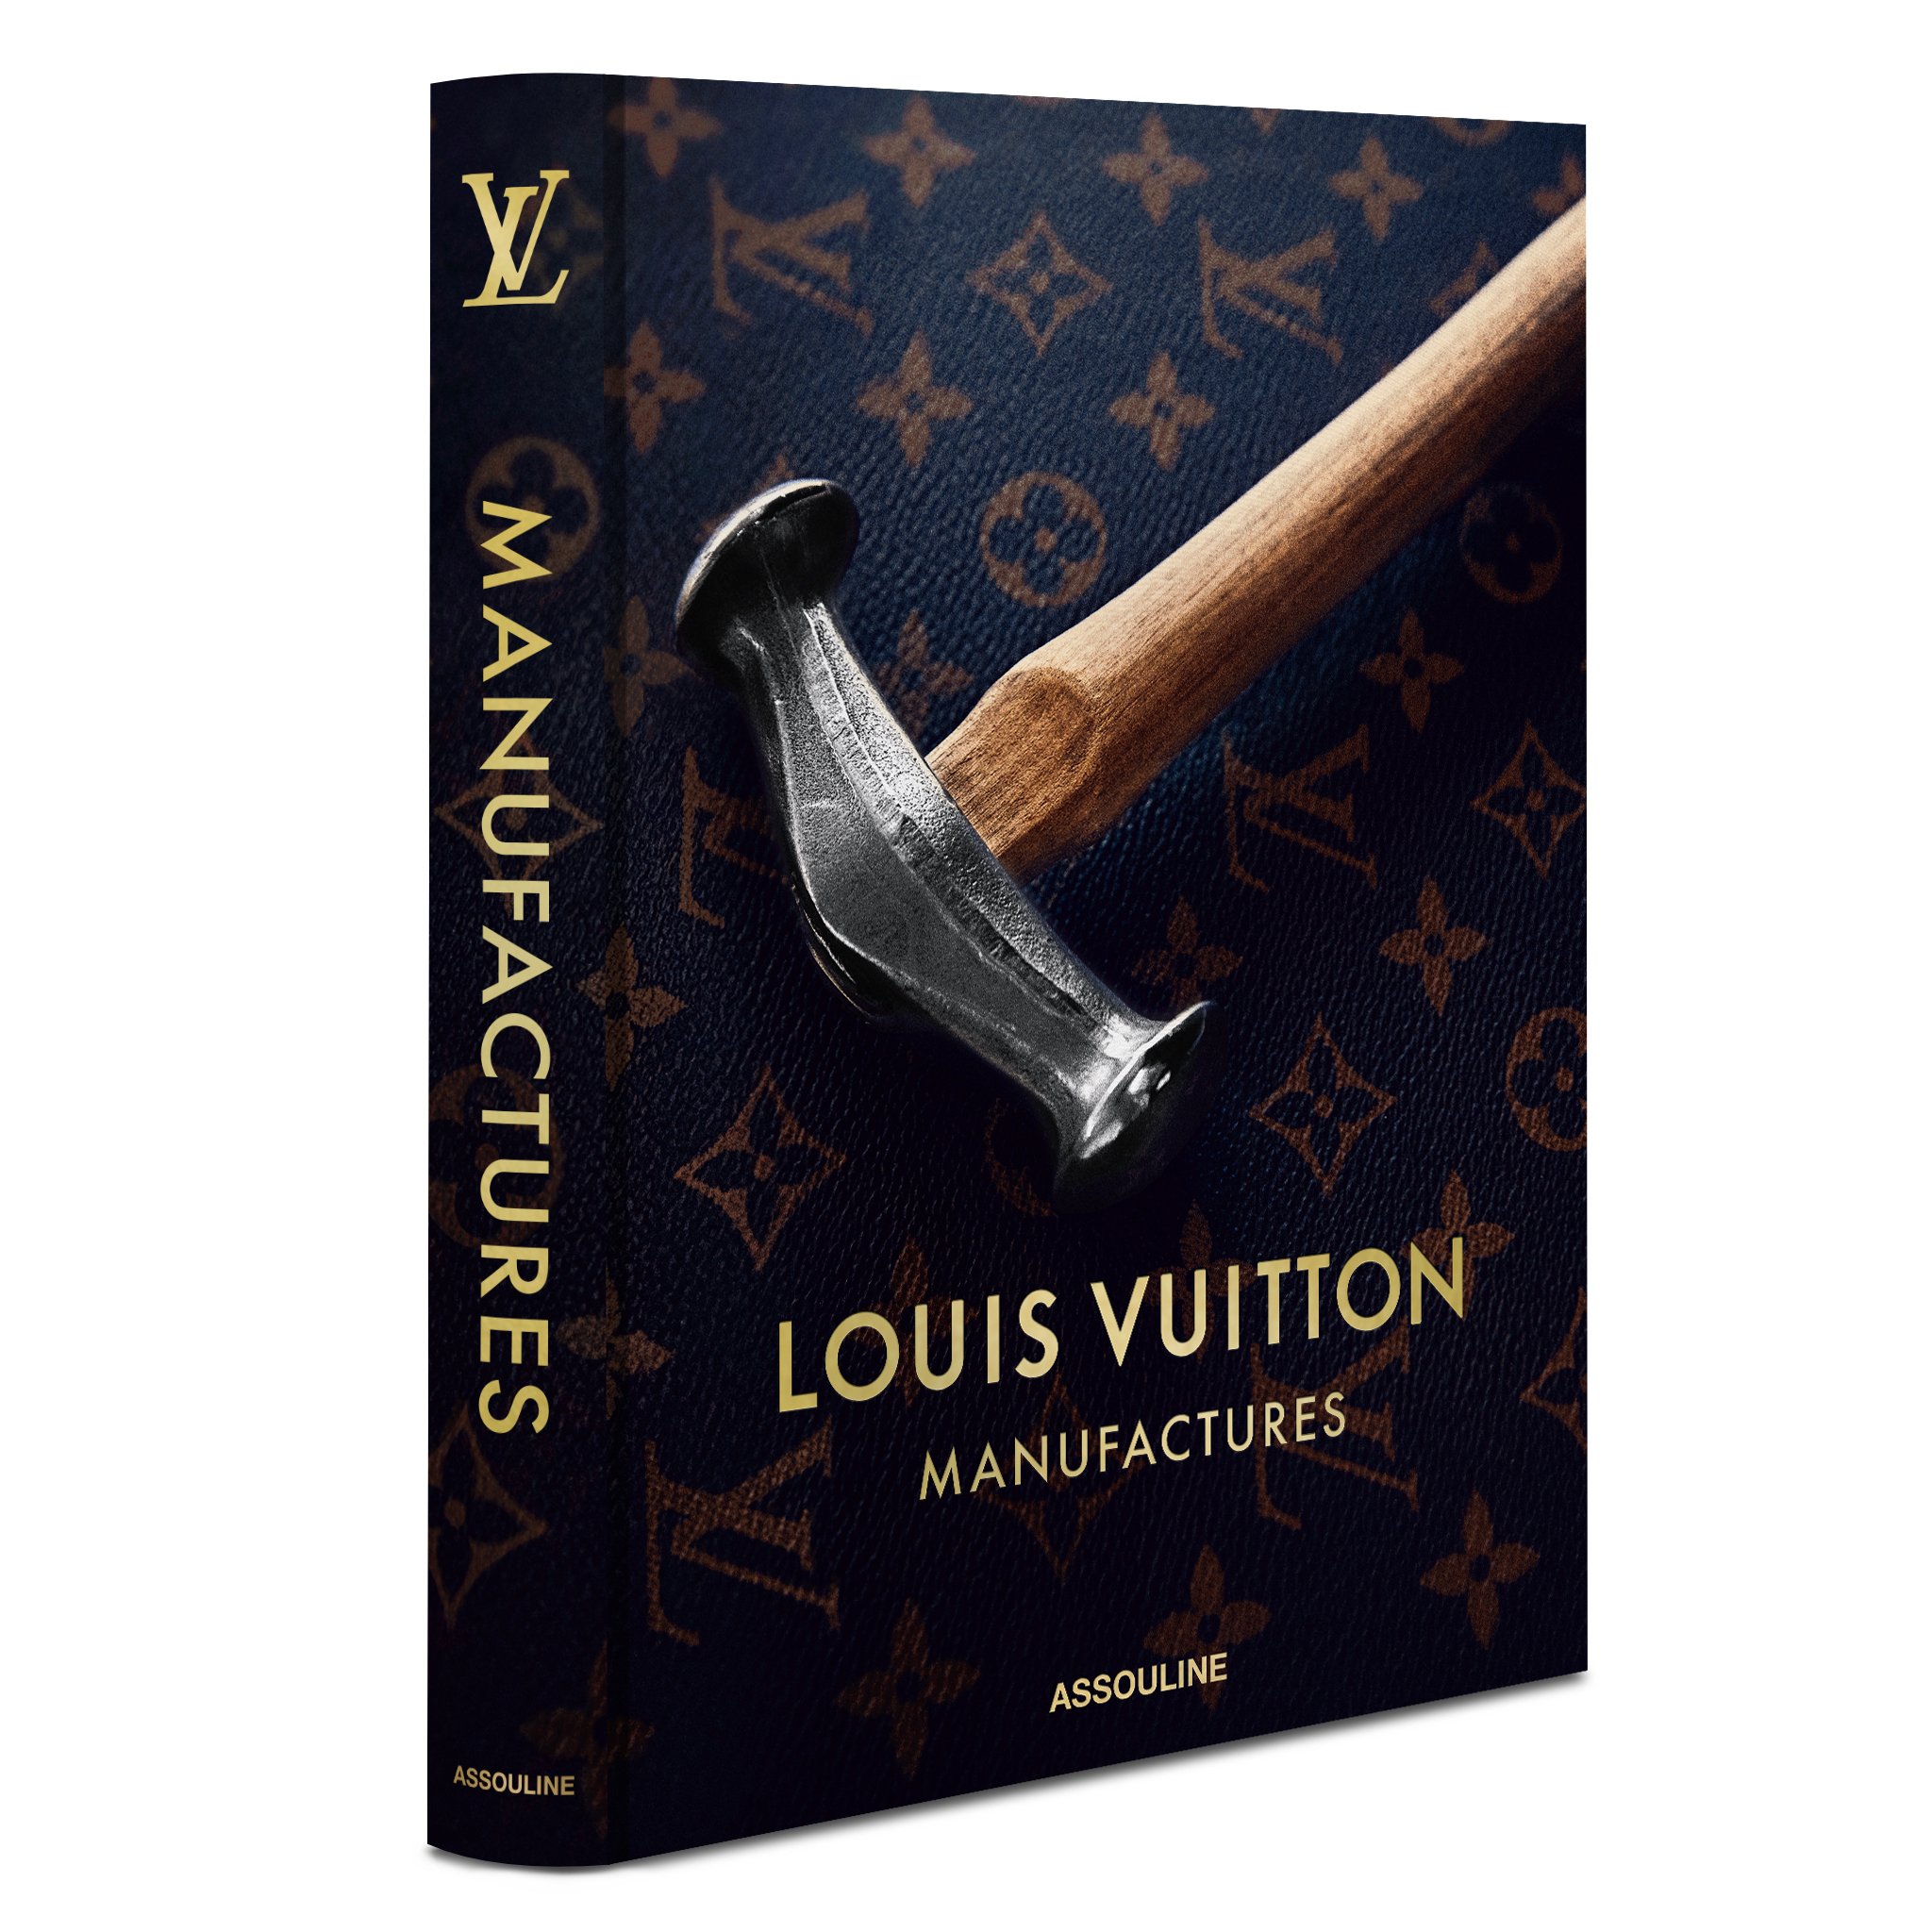 Louis Vuitton made an amazing book that needs to be in your home